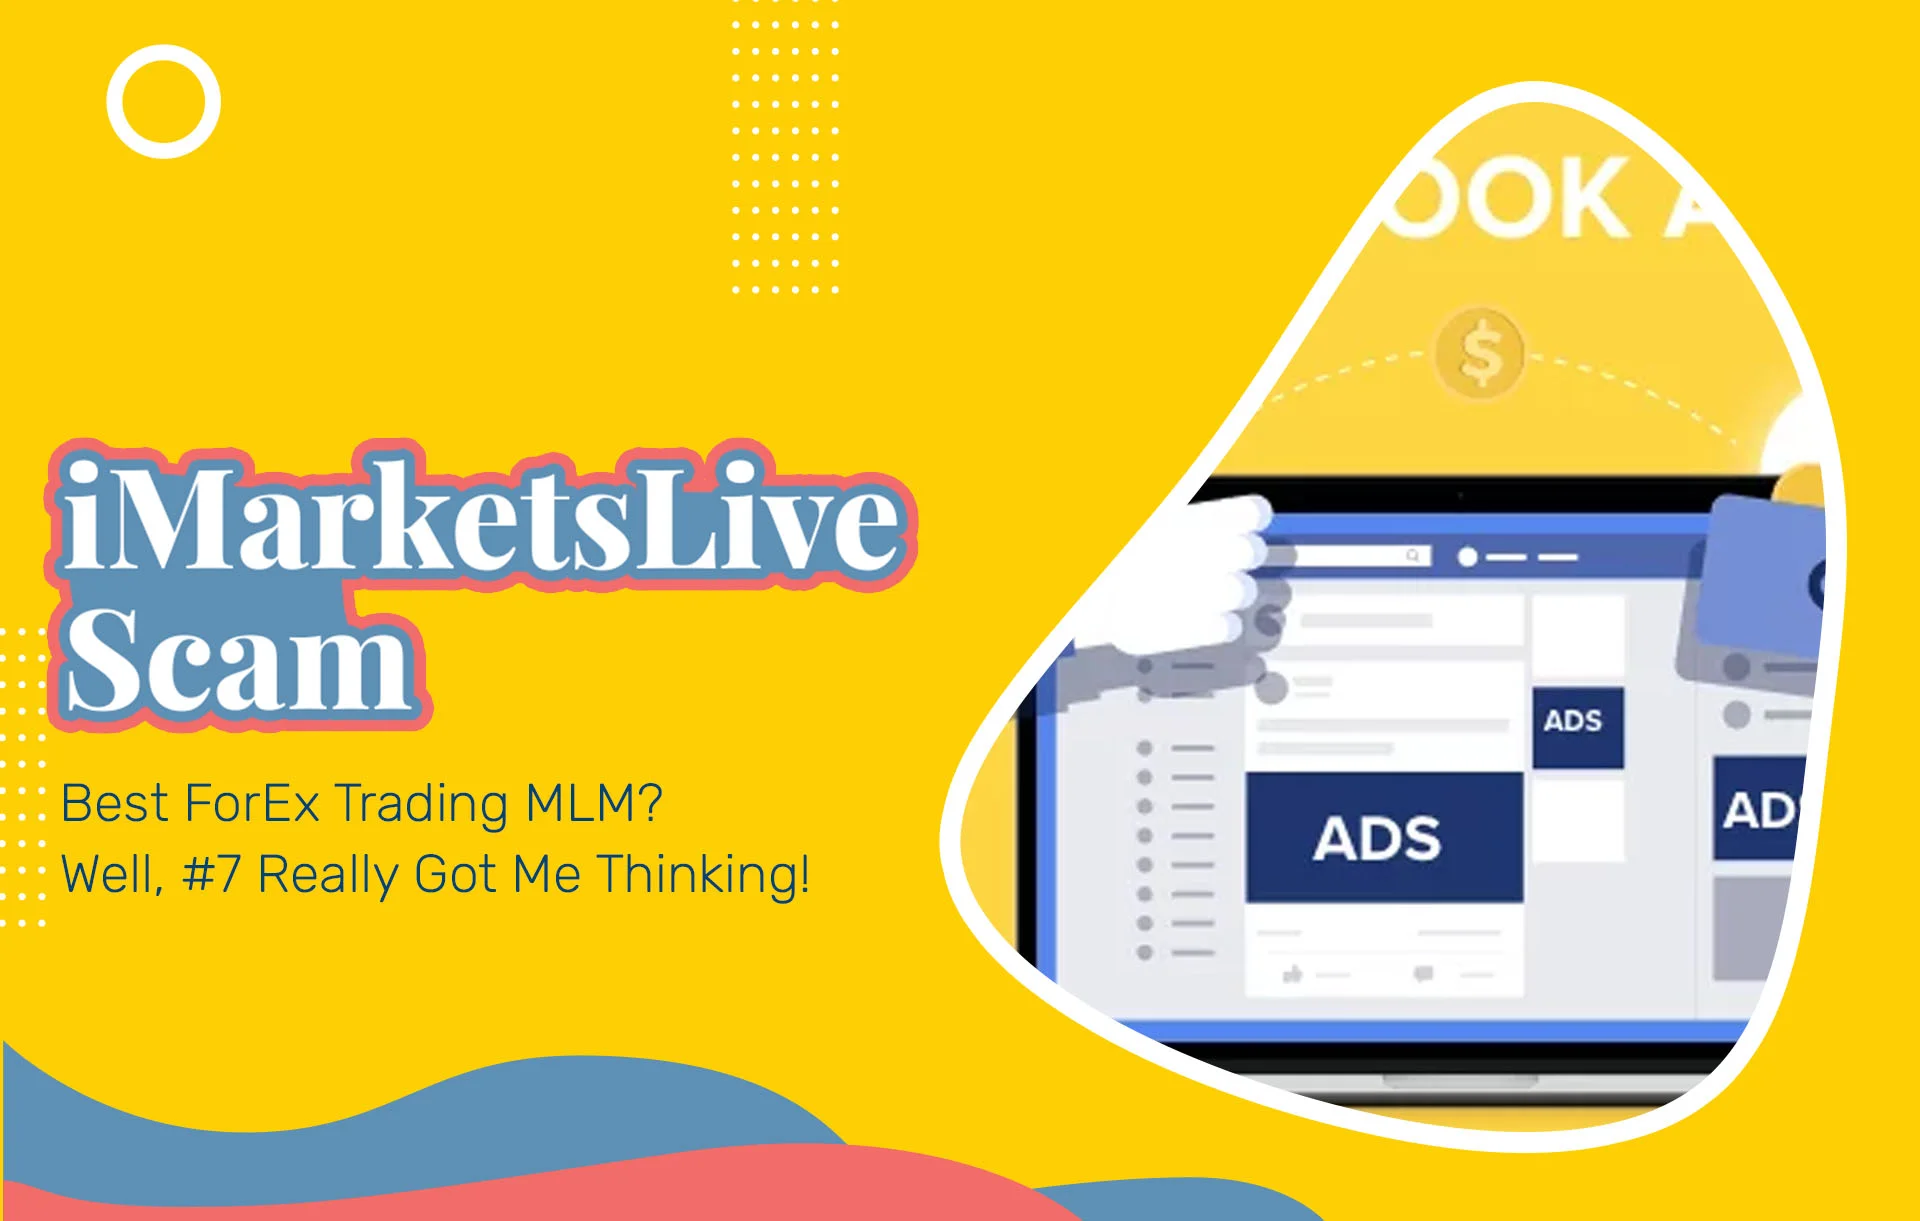 iMarketsLive Review: Best ForEx Trading MLM?